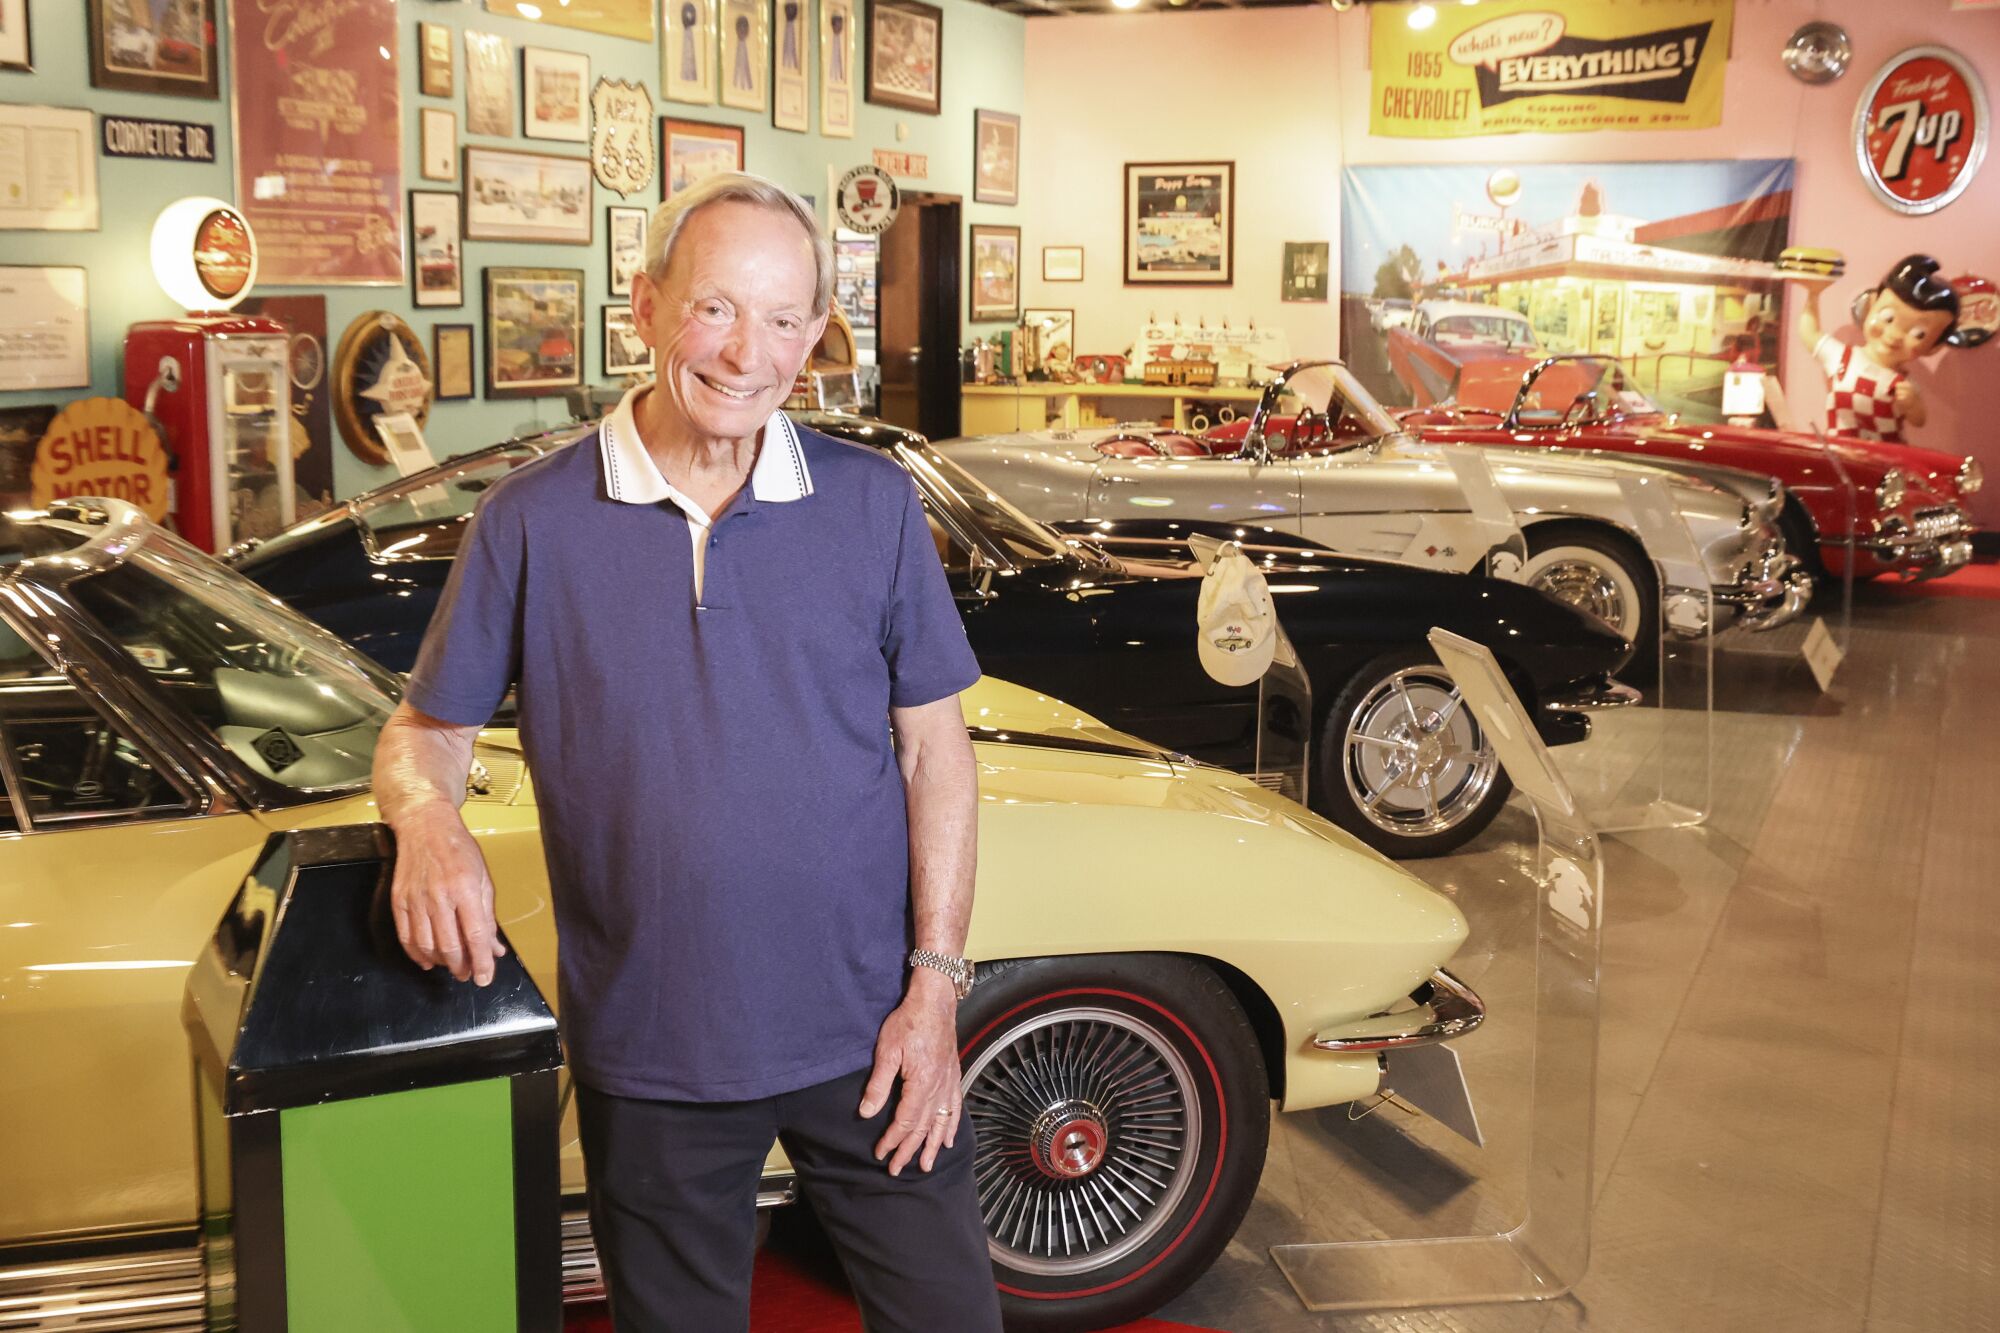 Car collector Chuck Spielman's poses for photos in his private museum called Only Yesterday in Sorrento Valley.